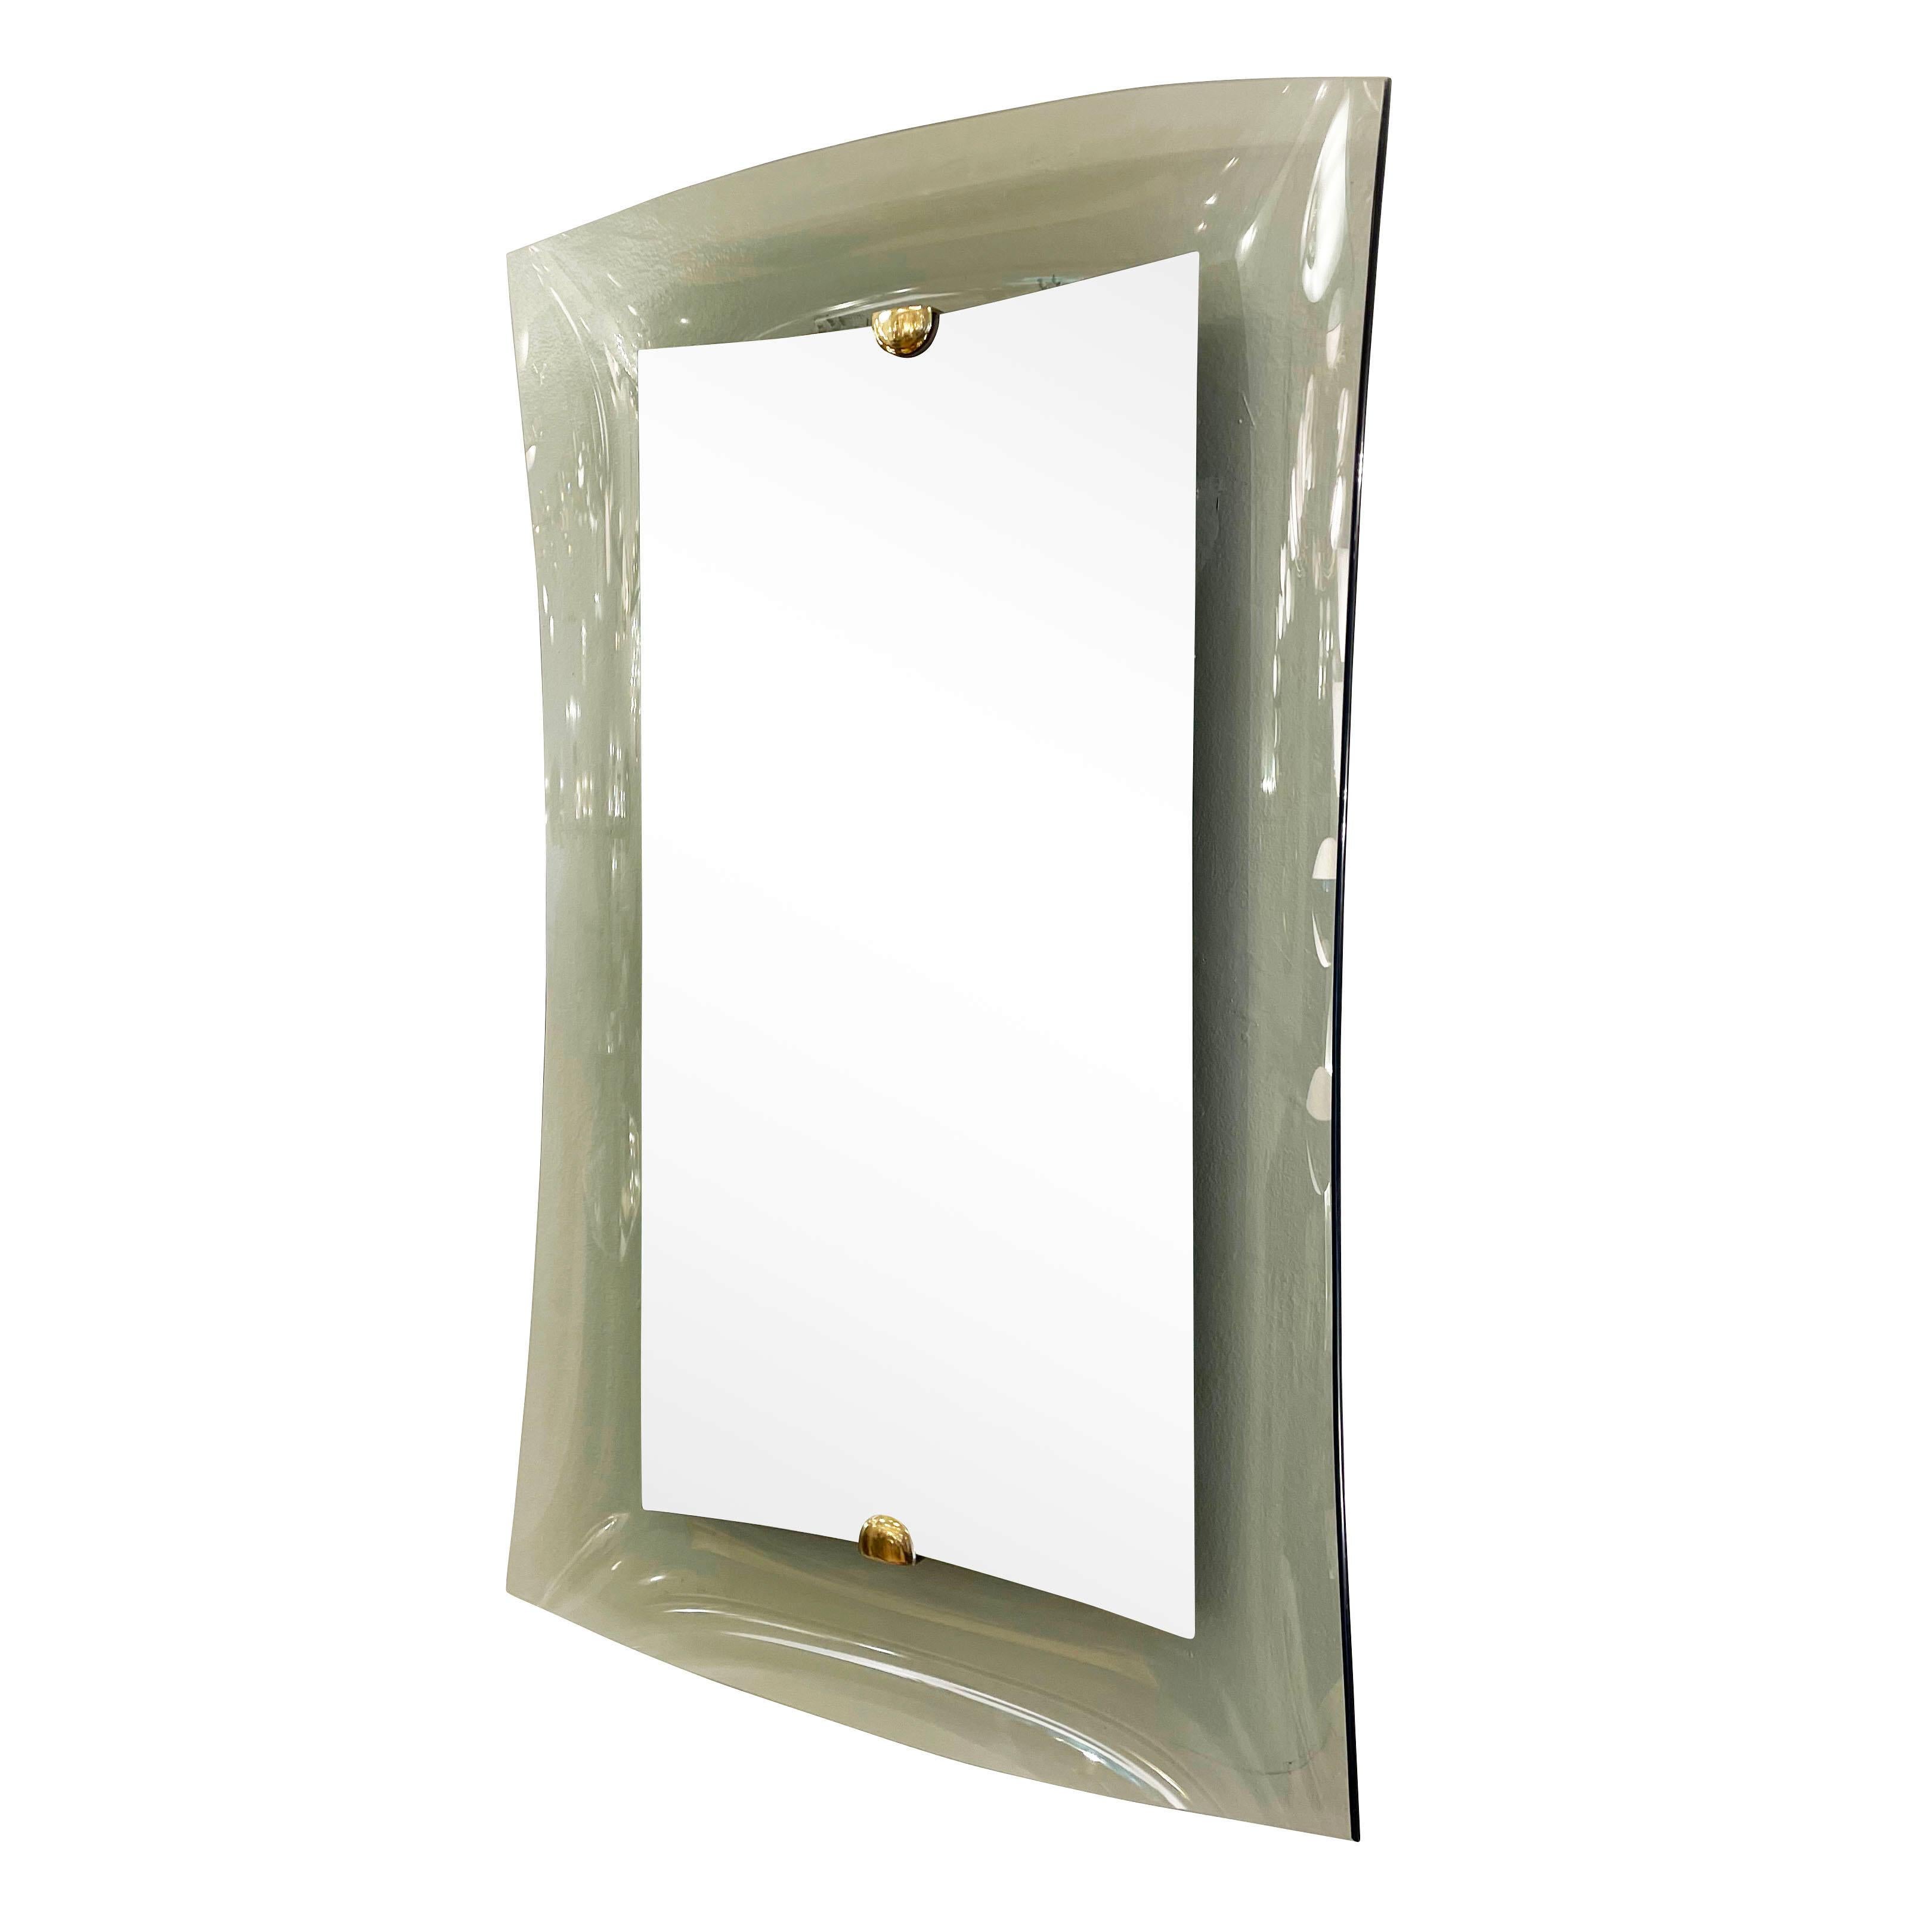 Mid-century mirror model 2712 by Cristal Arte. Features a concave gray smoked glass frame with a raised mirrored center held by brass hardware. 

Condition: Excellent vintage condition, minor wear consistent with age and use. Age spots to the